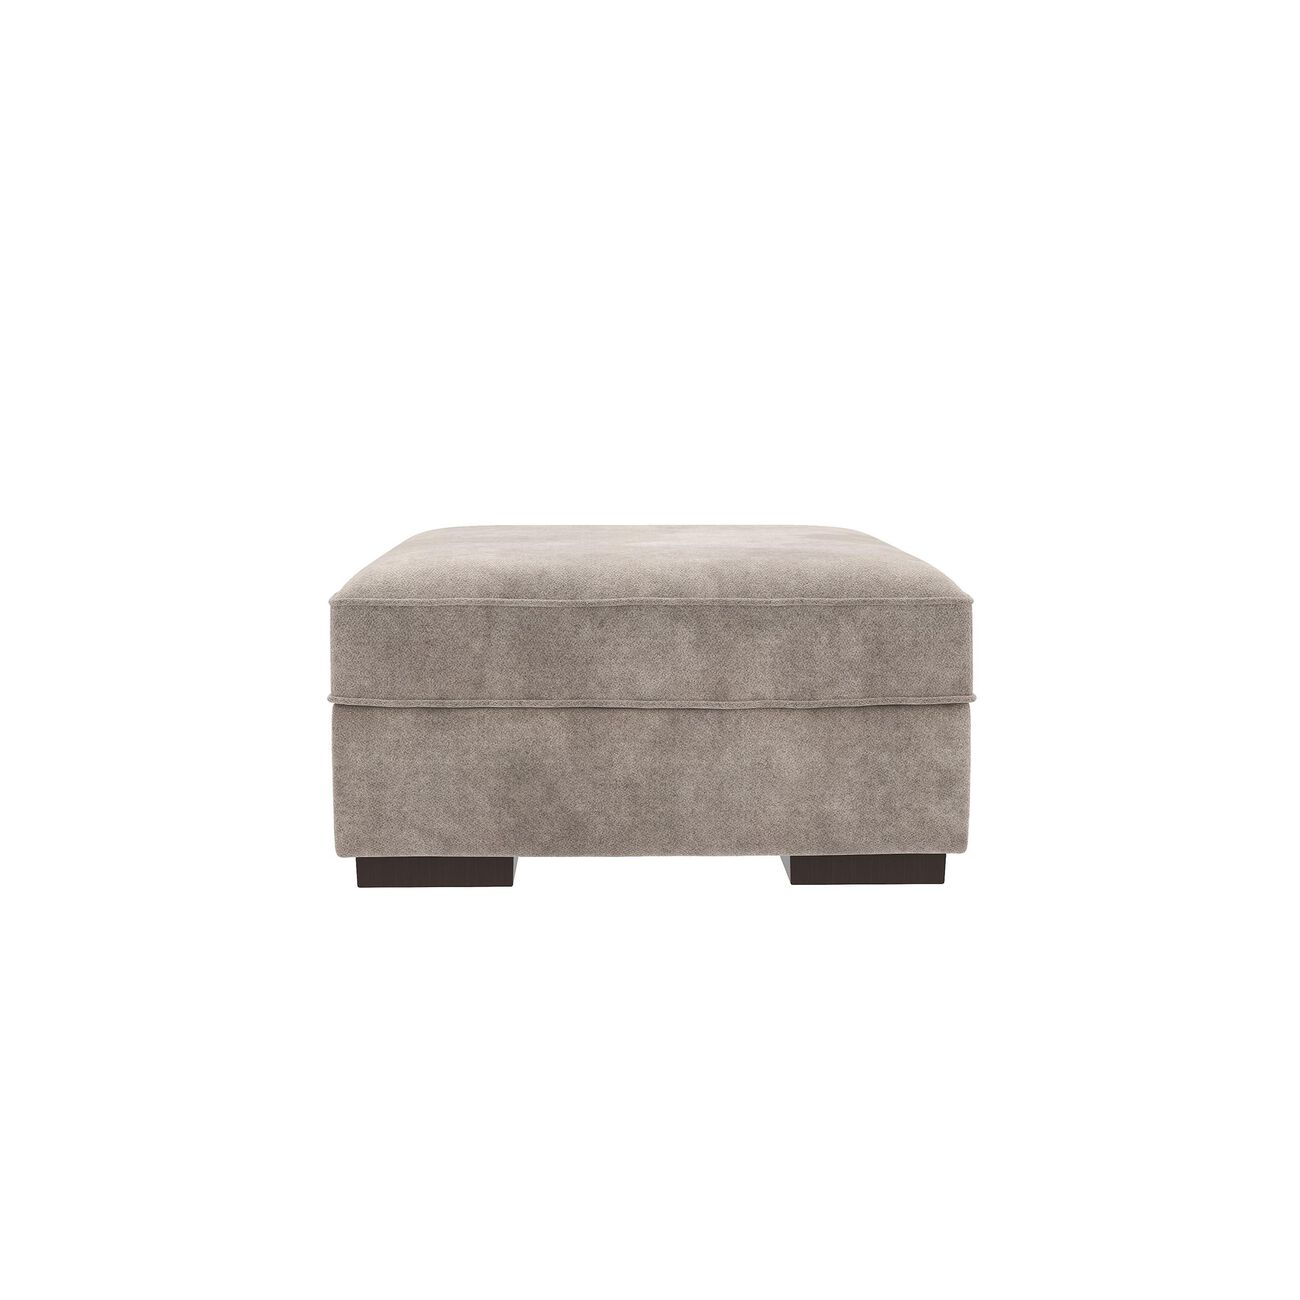 Wooden Storage Ottoman with Durable Block Legs, Silver and Black